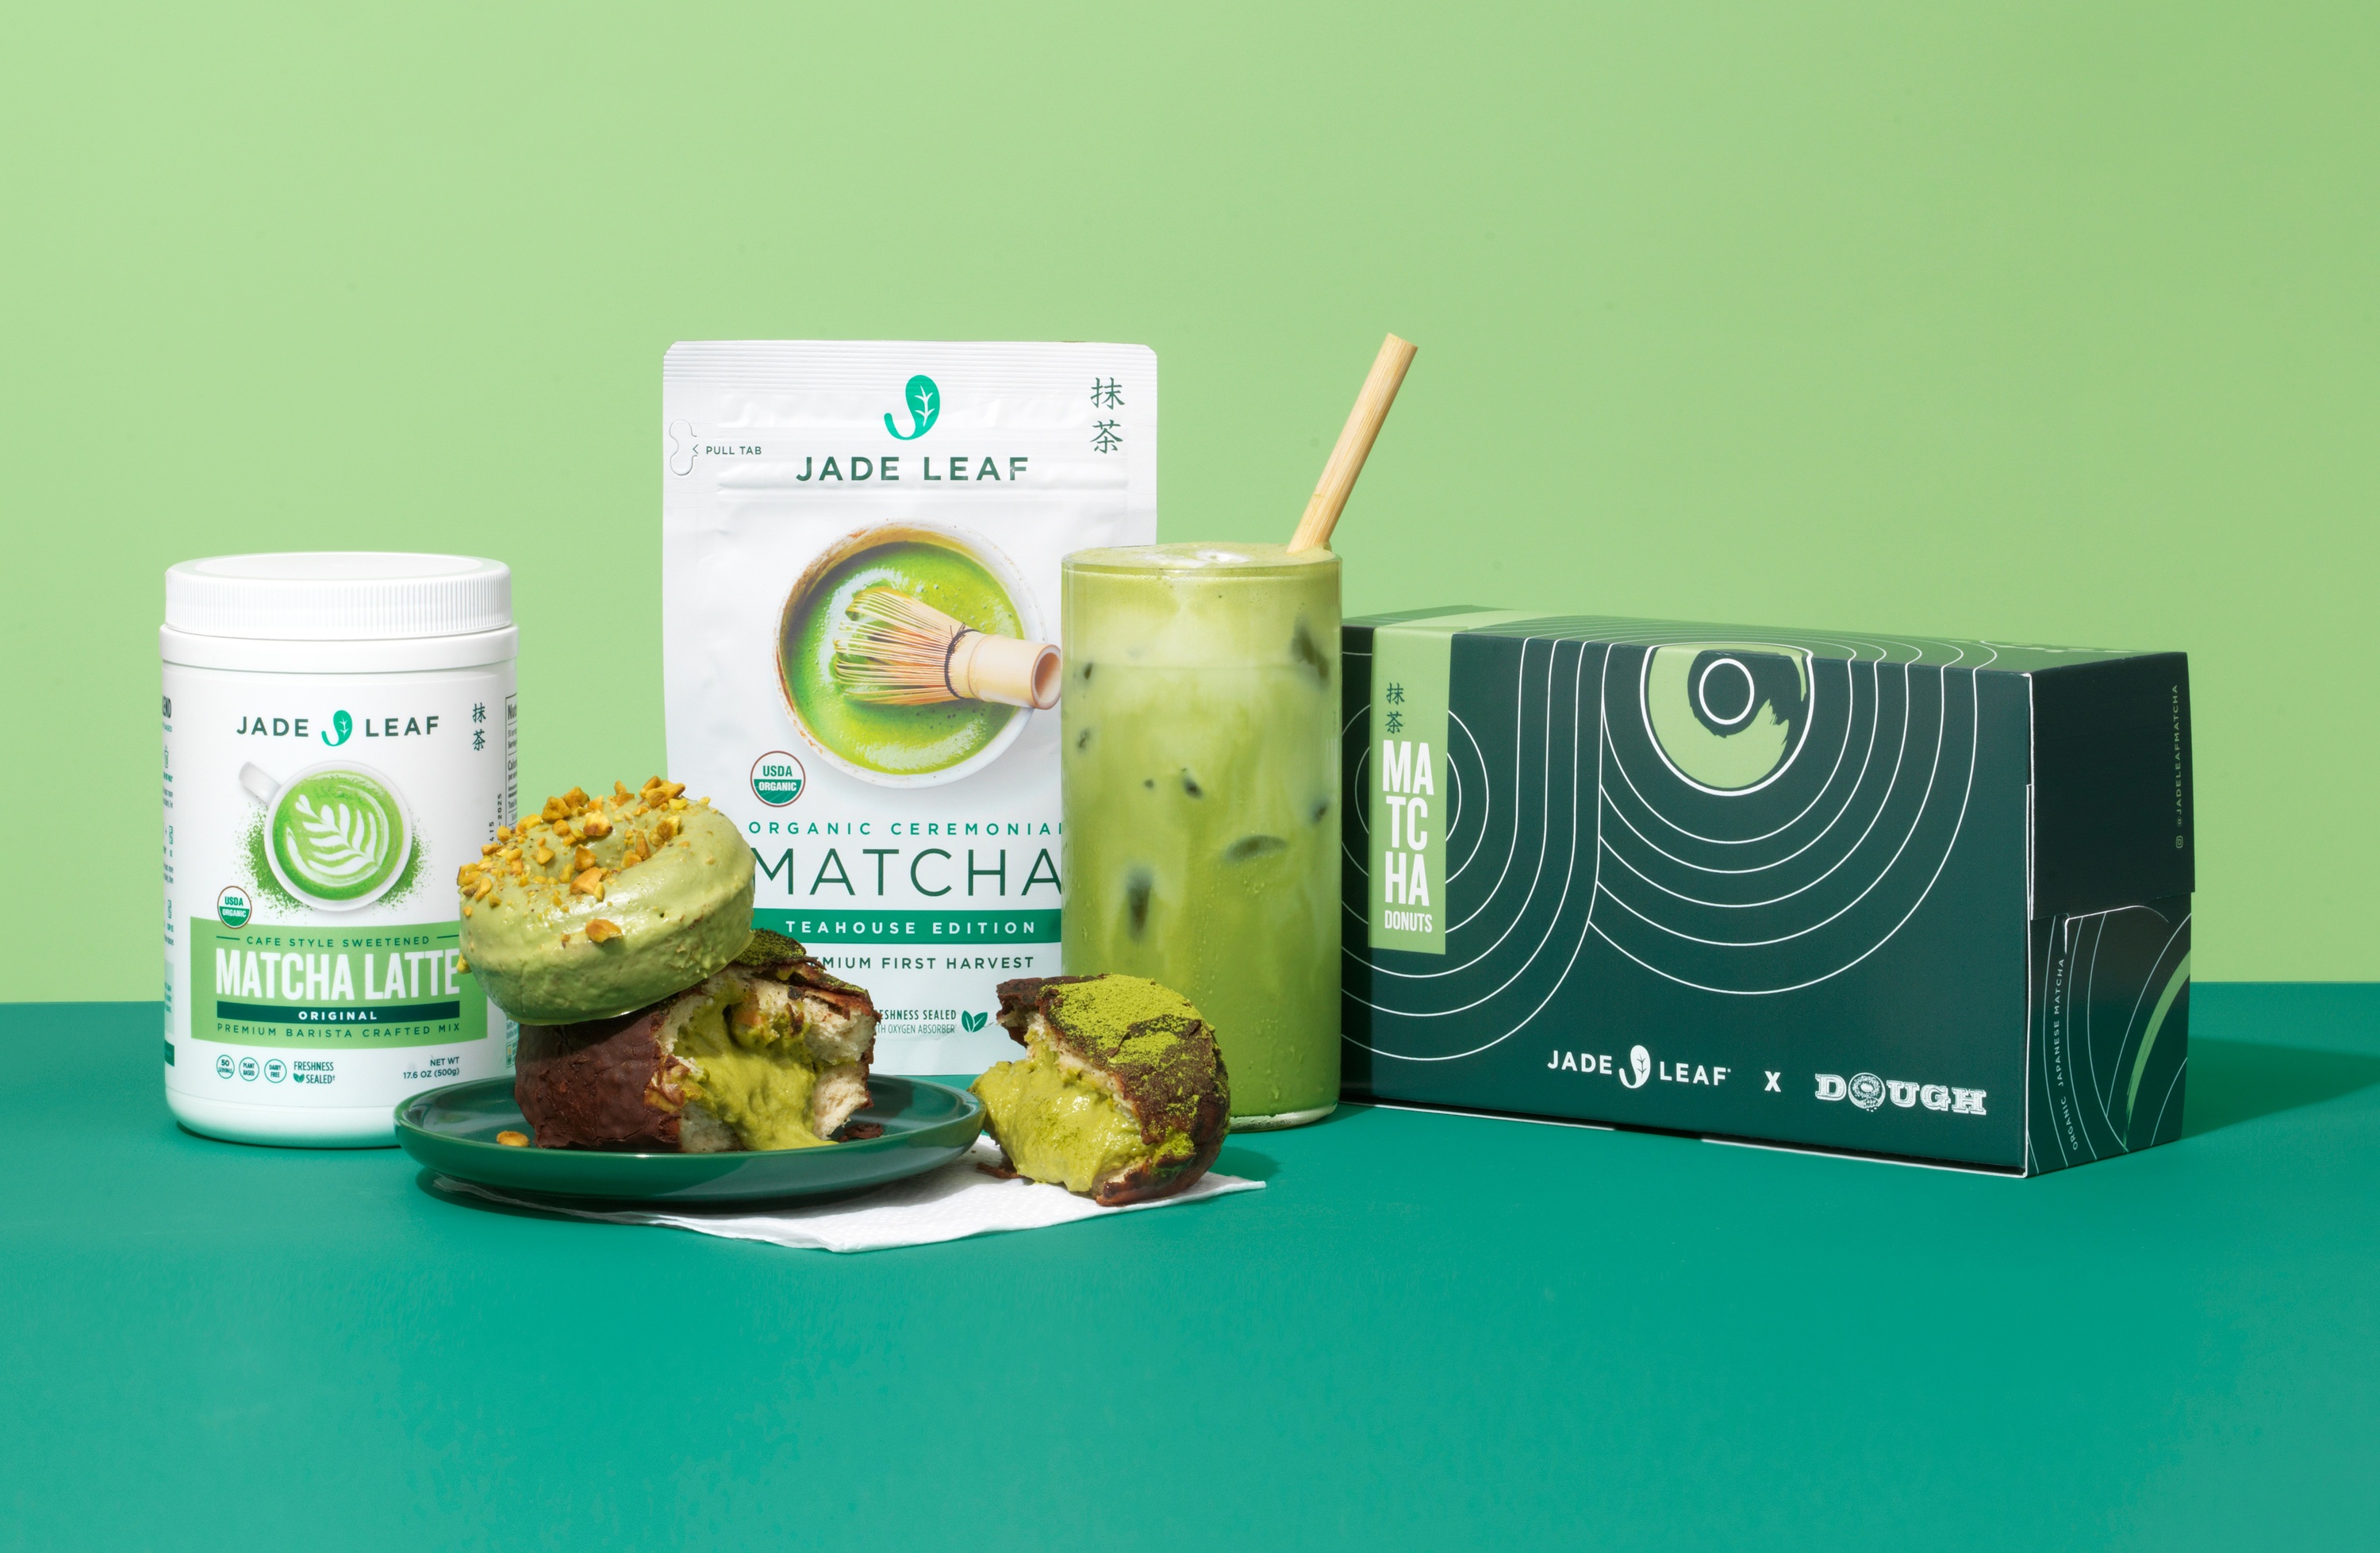 This green-tea brand is celebrating National Matcha Day with free drinks